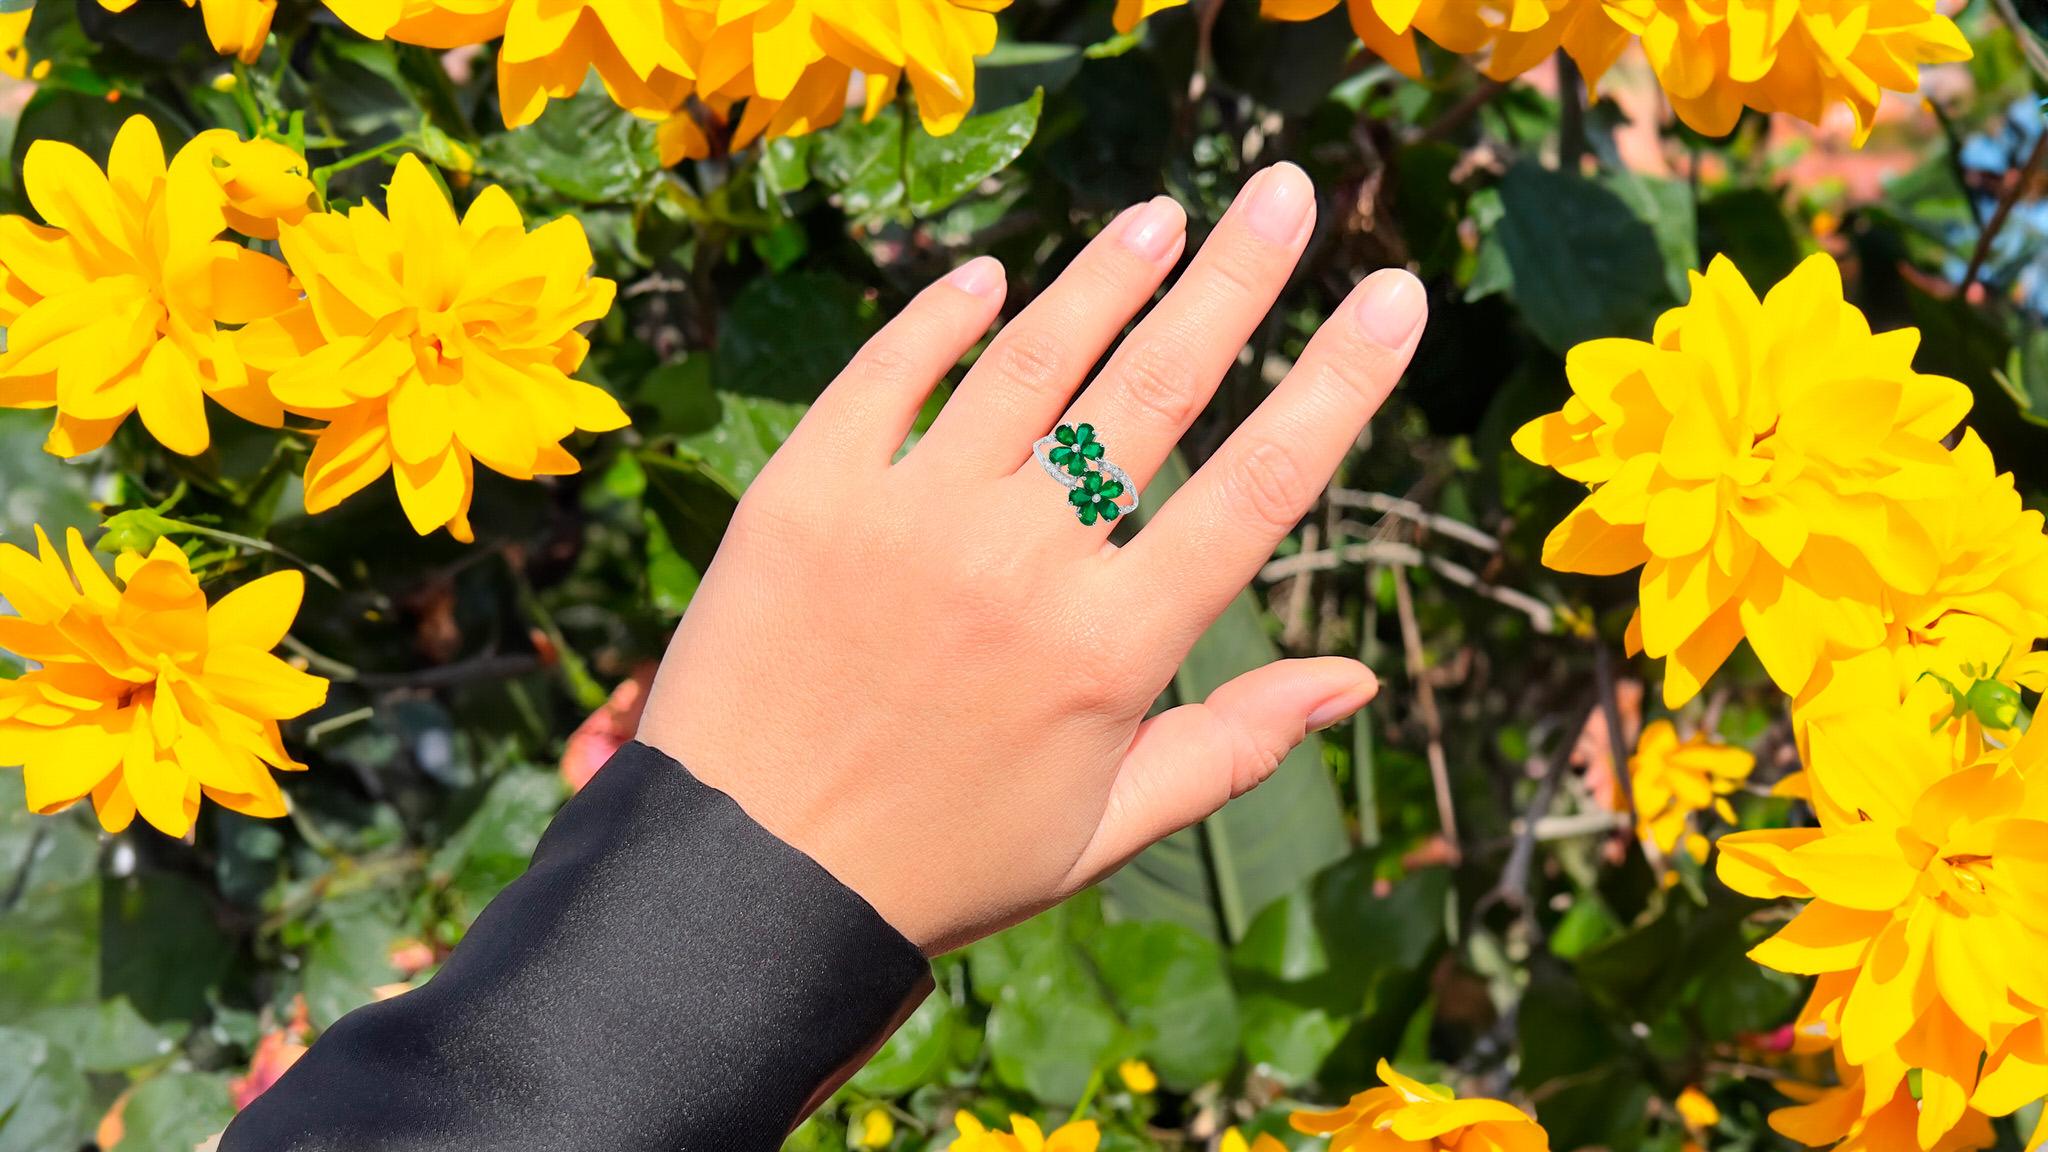 It comes with the Gemological Appraisal by GIA GG/AJP
All Gemstones are Natural
10 Emeralds = 1.32 Carats
14 Diamonds = 0.10 Carats
Metal: 18K White Gold
Ring Size: 6.5* US
*It can be resized complimentary